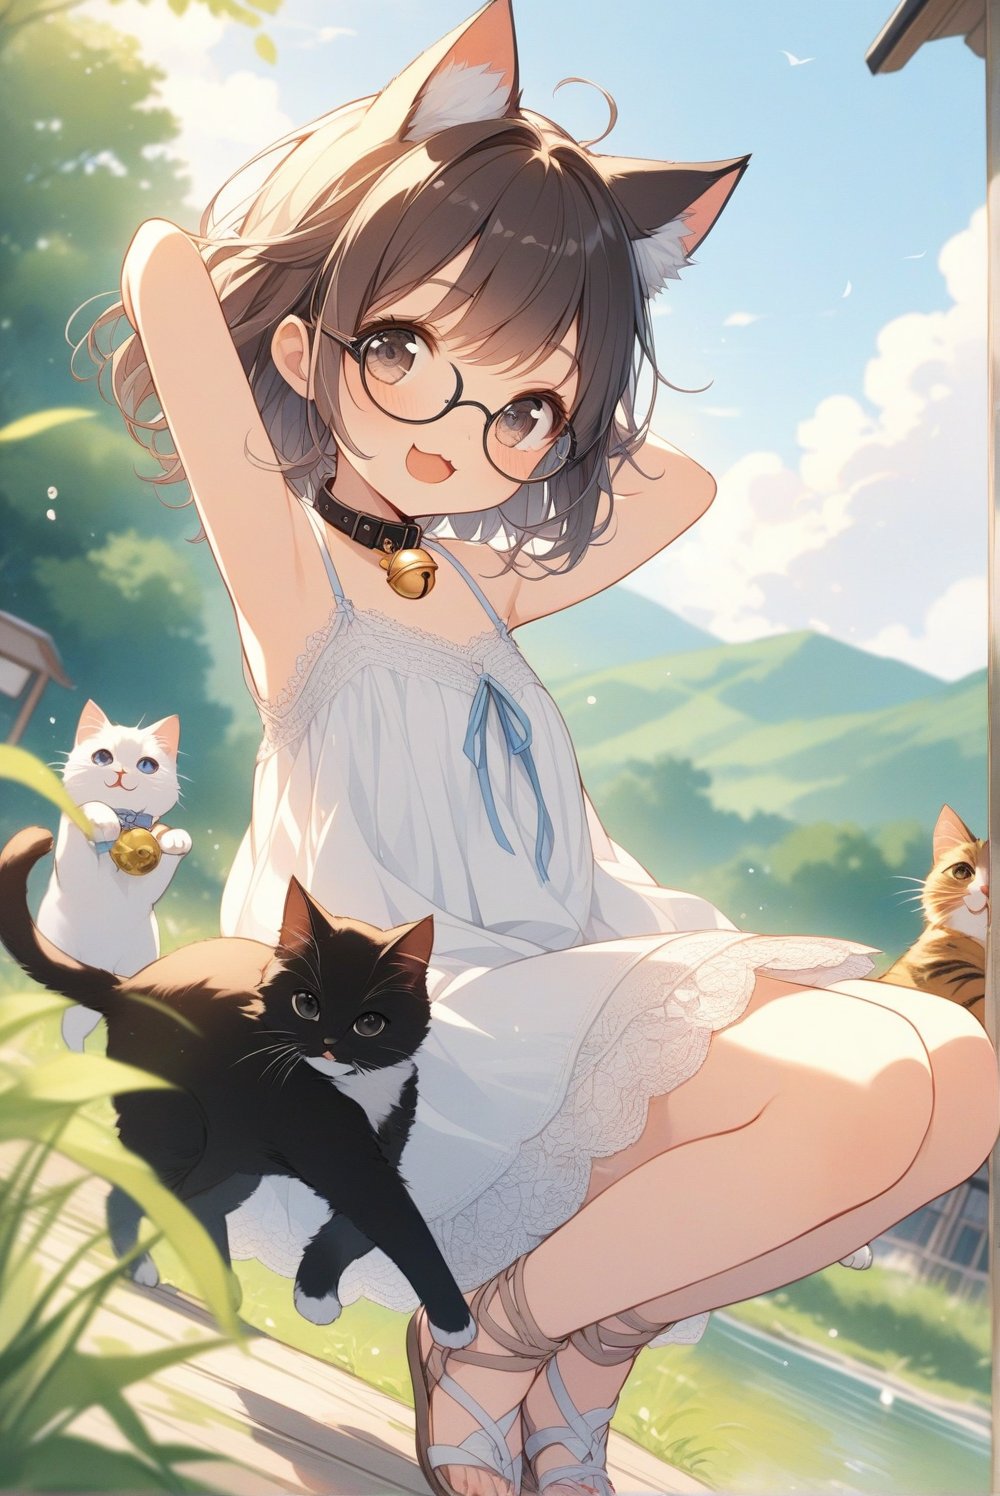 beautiful details, uniform 8K wallpaper, high resolution, exquisite texture in every detail,  beautiful illustration,manga touch, good contrast

1girl, (((very young girl))), shyness,
summer, blue sky, japanese countryside, in lakeside,

white Summer-like camisole dress , blue line ribbon, lots of lace,

((nekomimi)),Cat ears the same color as her hair,
short hair, open mouth, (glasses), round eyes, cat collar,  bell, jingle bell, neck bell, black hair, smile, :3,

in the park, 
play with cats, looking at cats, arms up, arm in cat, hand on cat, 
frying,  jumping, fluttering in the wind,
dynamic action,

shot angle is slightly tilted, adding dynamic movement to the shot, shot from side and below,

nekomimimeganekao,Deformed